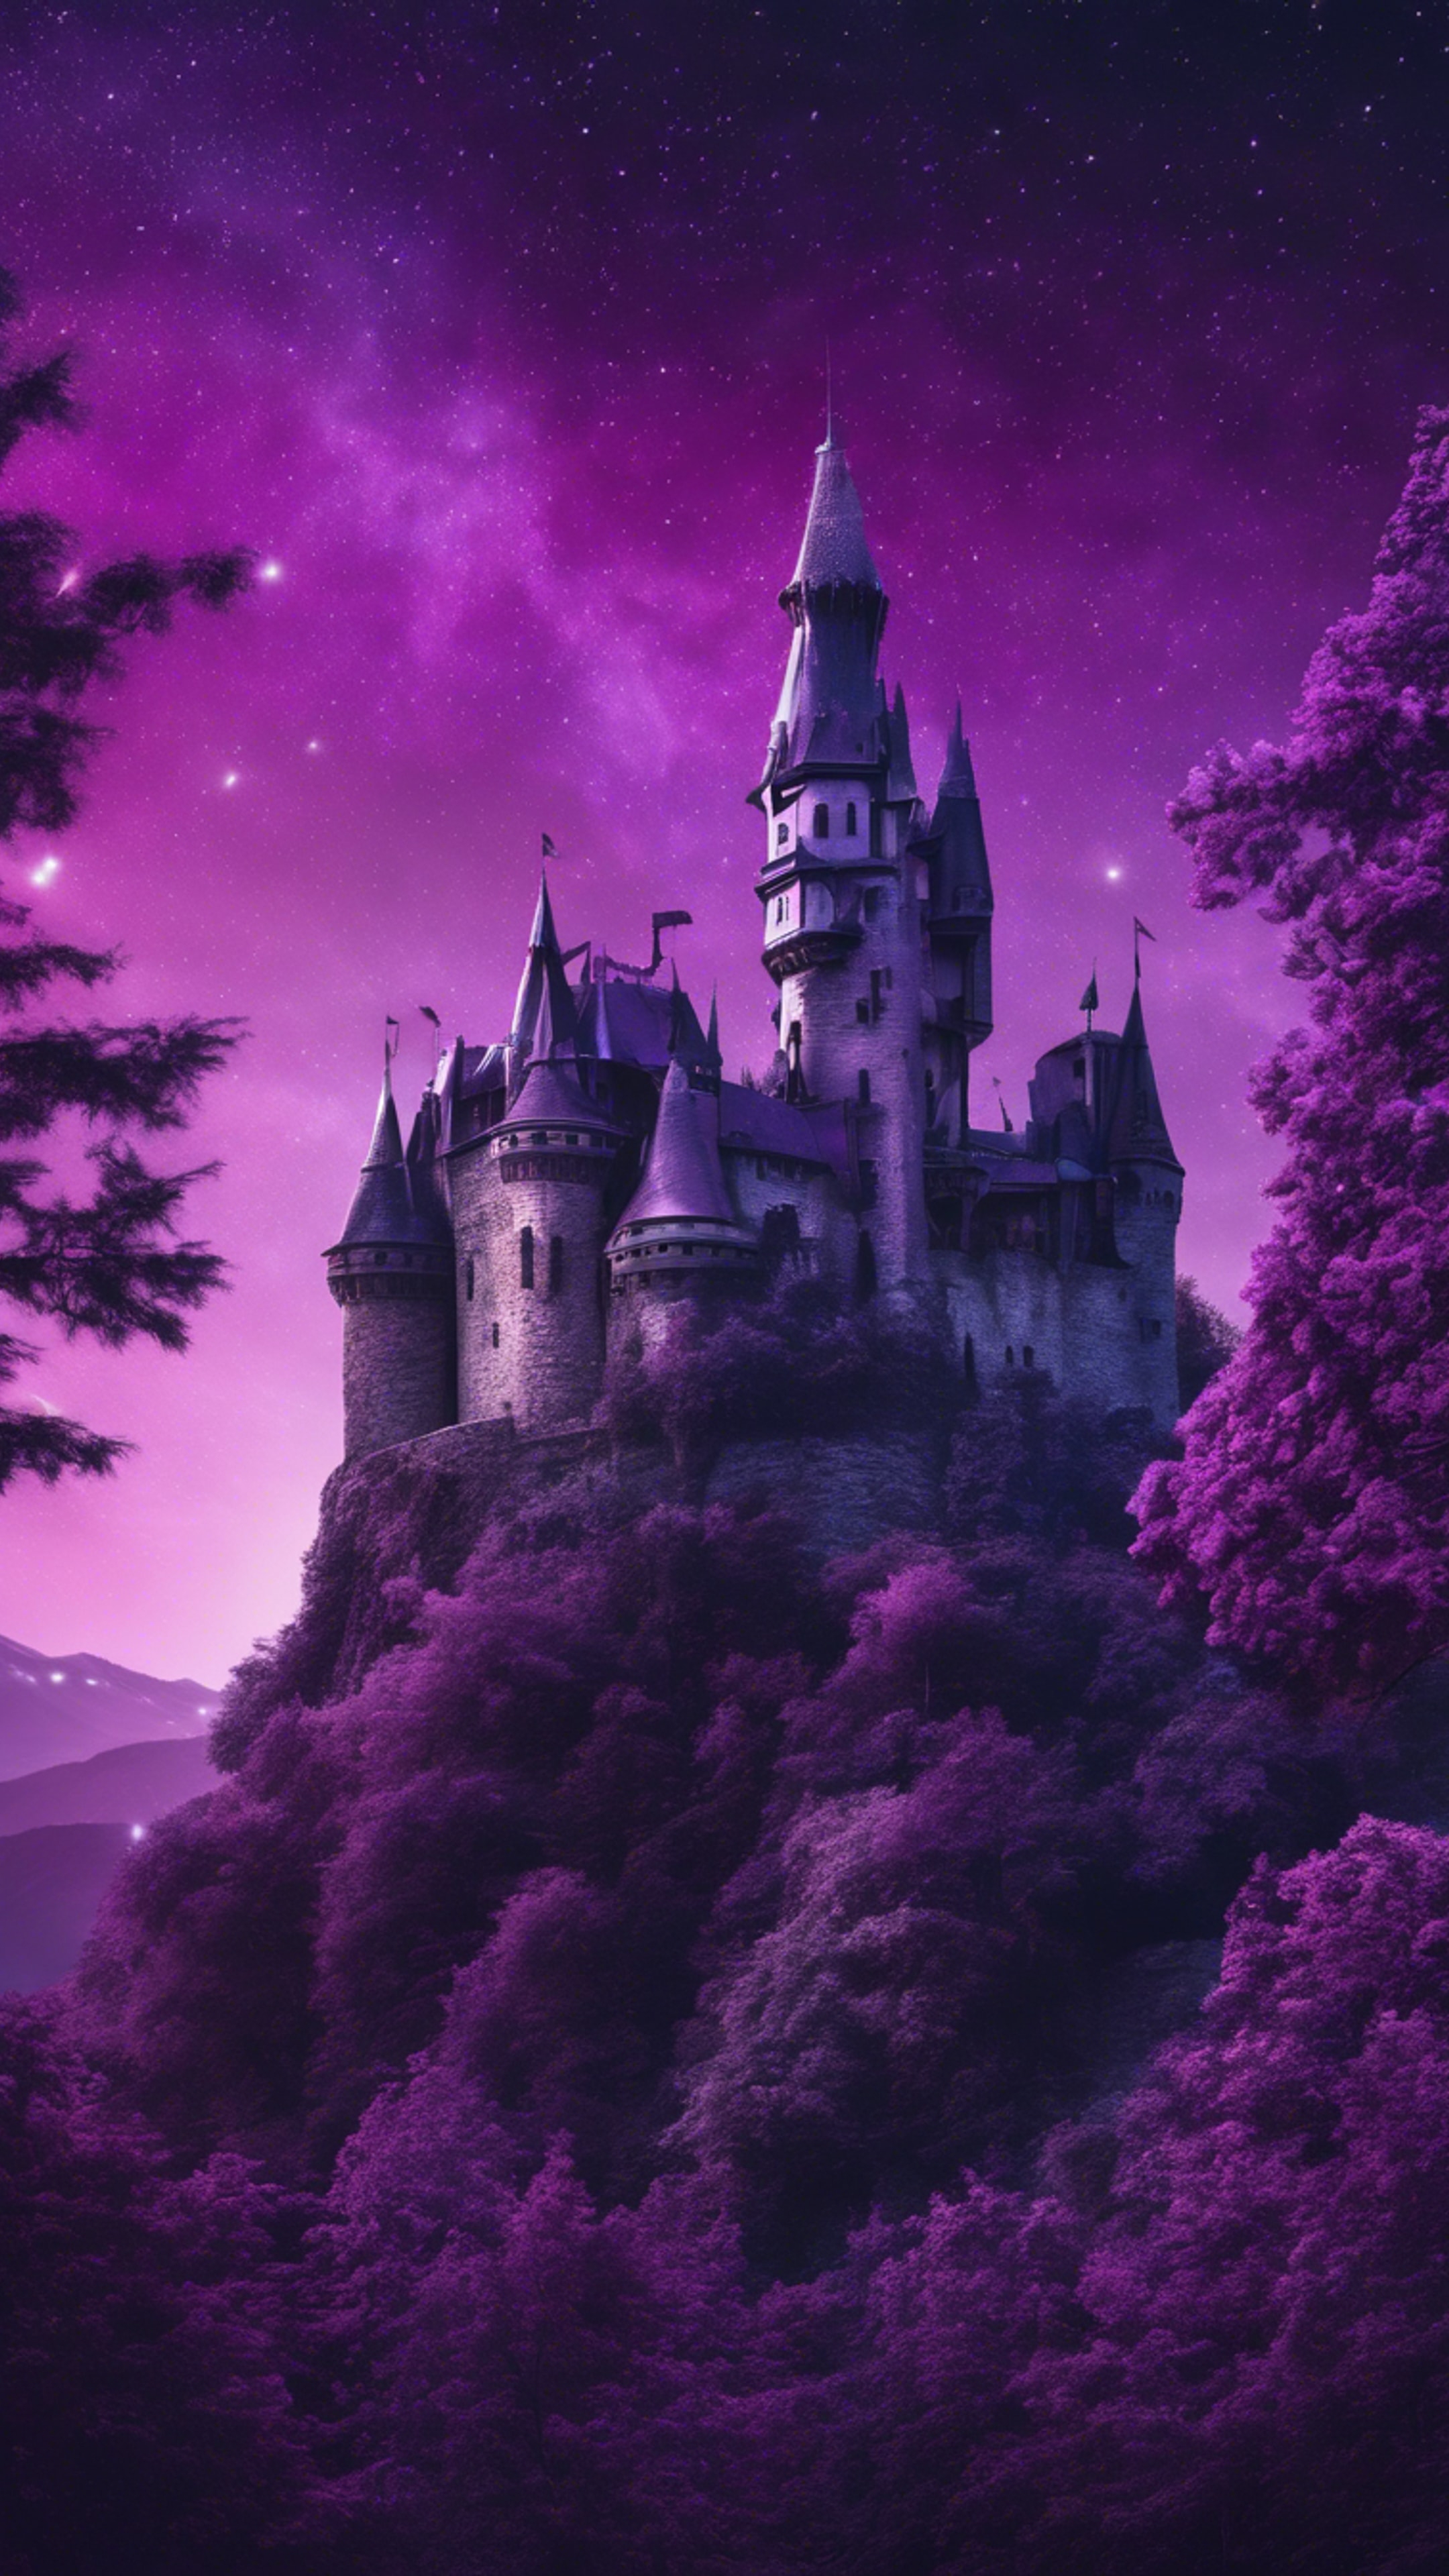 An imaginative collage including a deep purple night sky, a majestic purple castle, and a lush violet forest.壁紙[d69784f3cee744e79a0a]